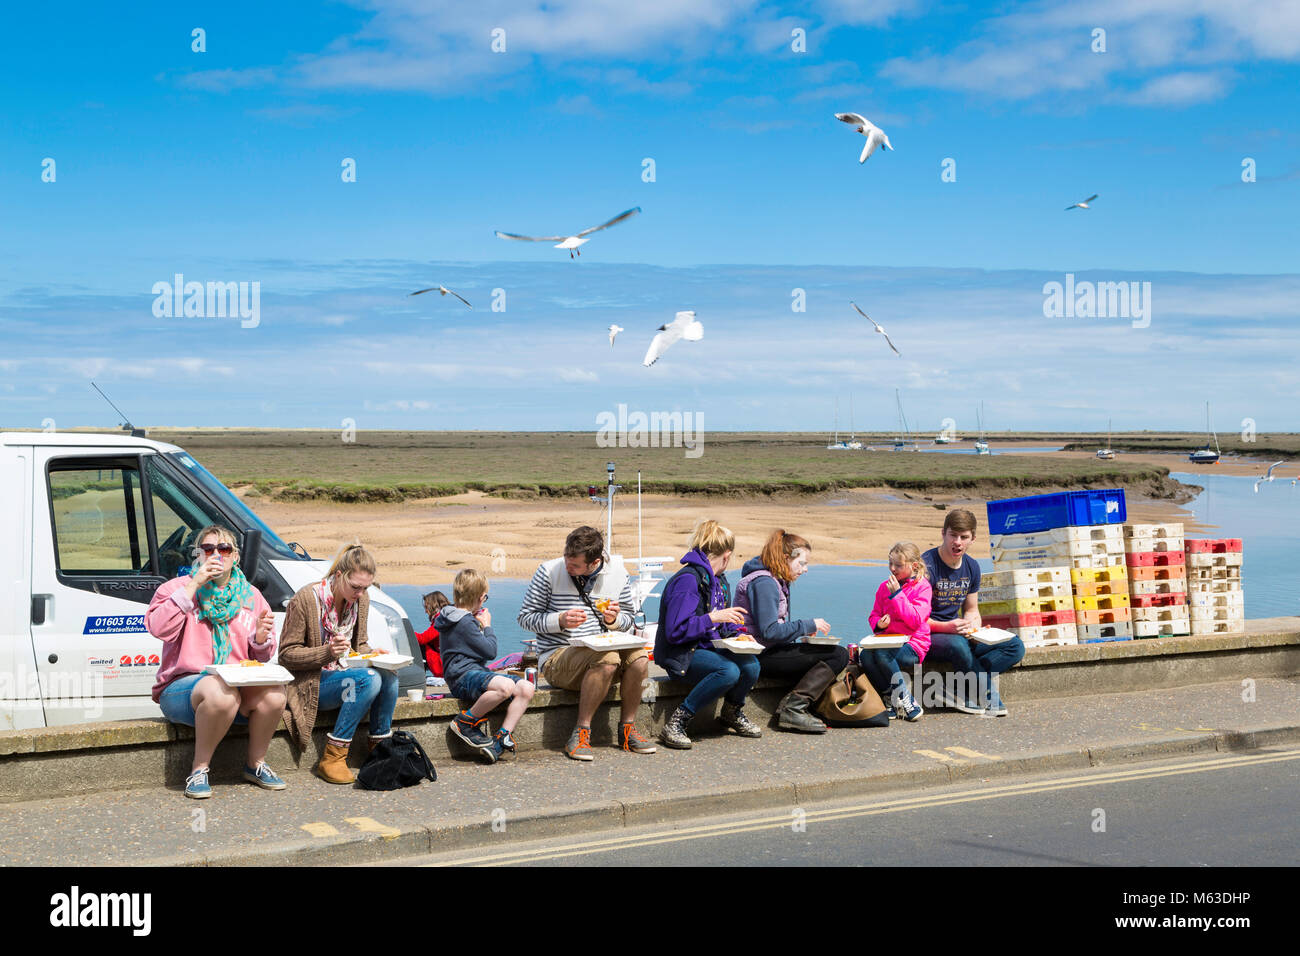 Enjoying fish and chips on the quayside at Wells next the Sea. Stock Photo